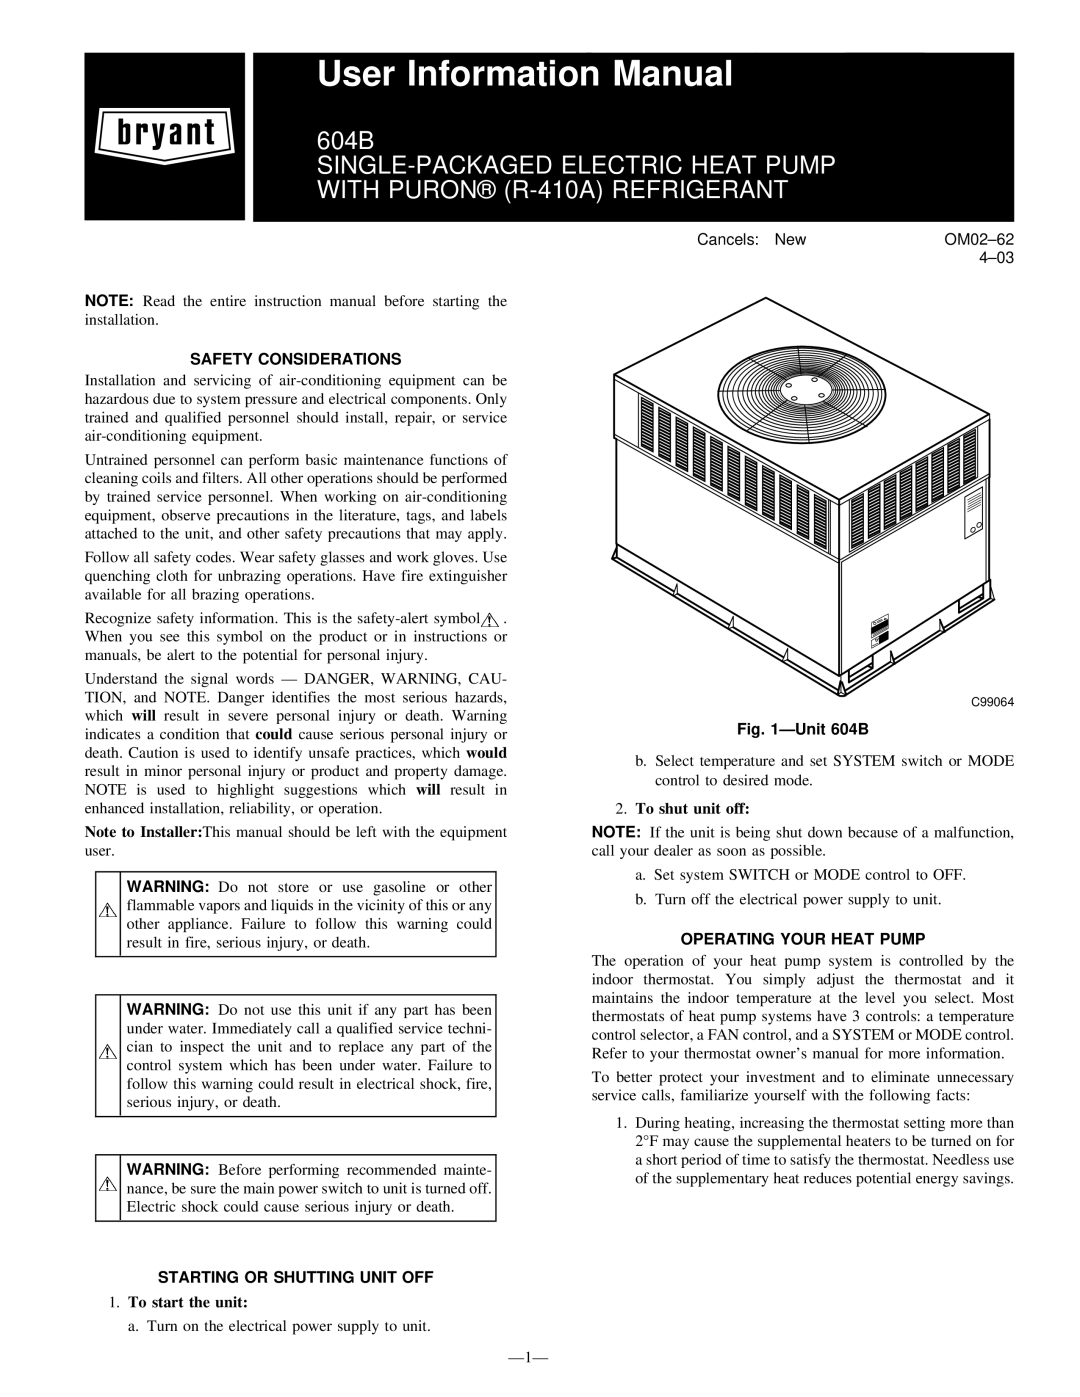 Bryant instruction manual Safety Considerations, Starting Or Shutting Unit Off, To start the unit, ÐUnit 604B 